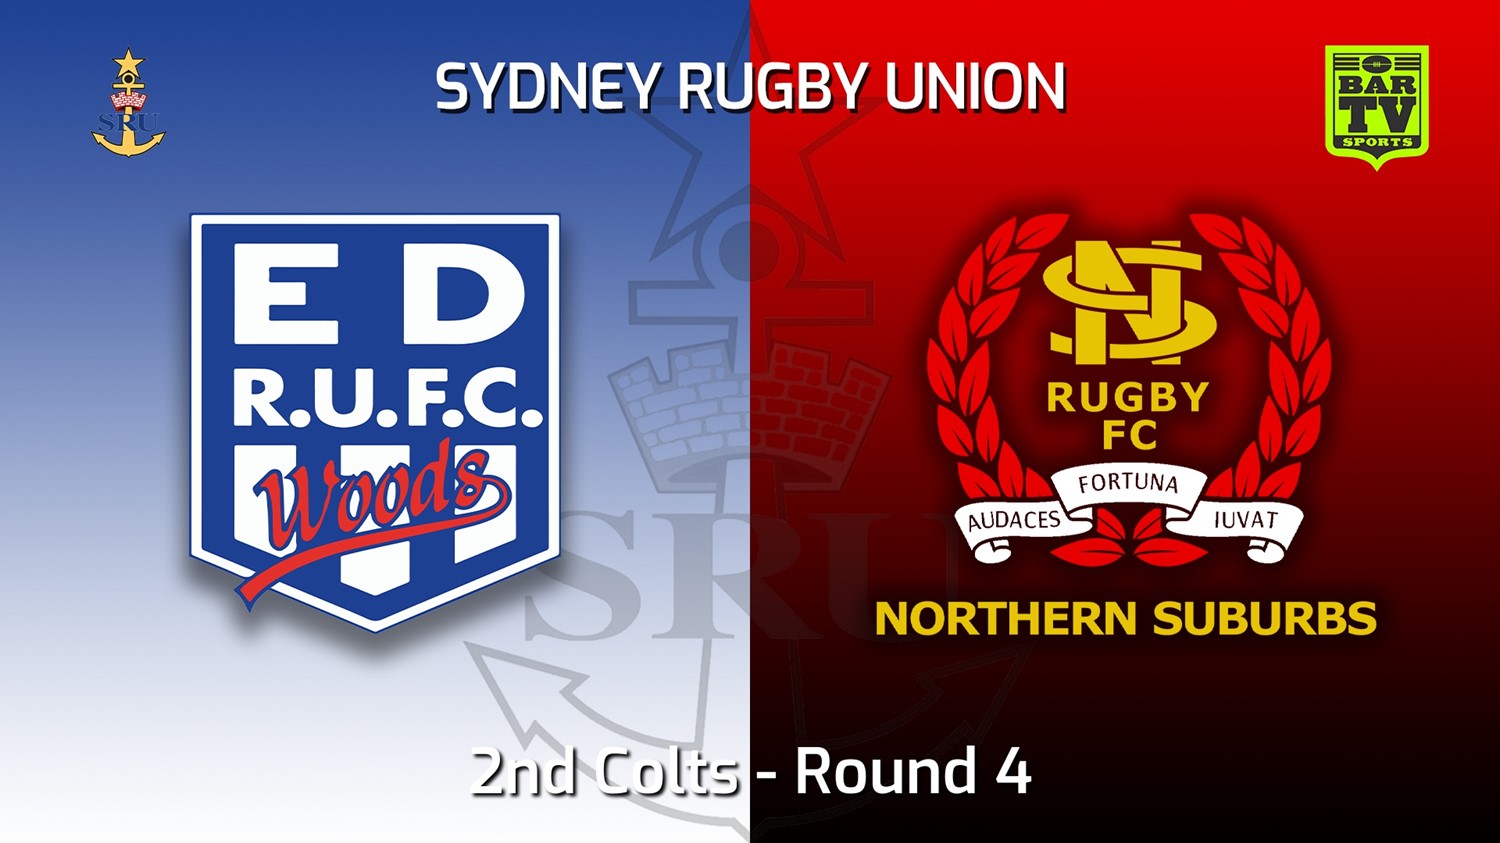 220423-Sydney Rugby Union Round 4 - 2nd Colts - Eastwood v Northern Suburbs Slate Image